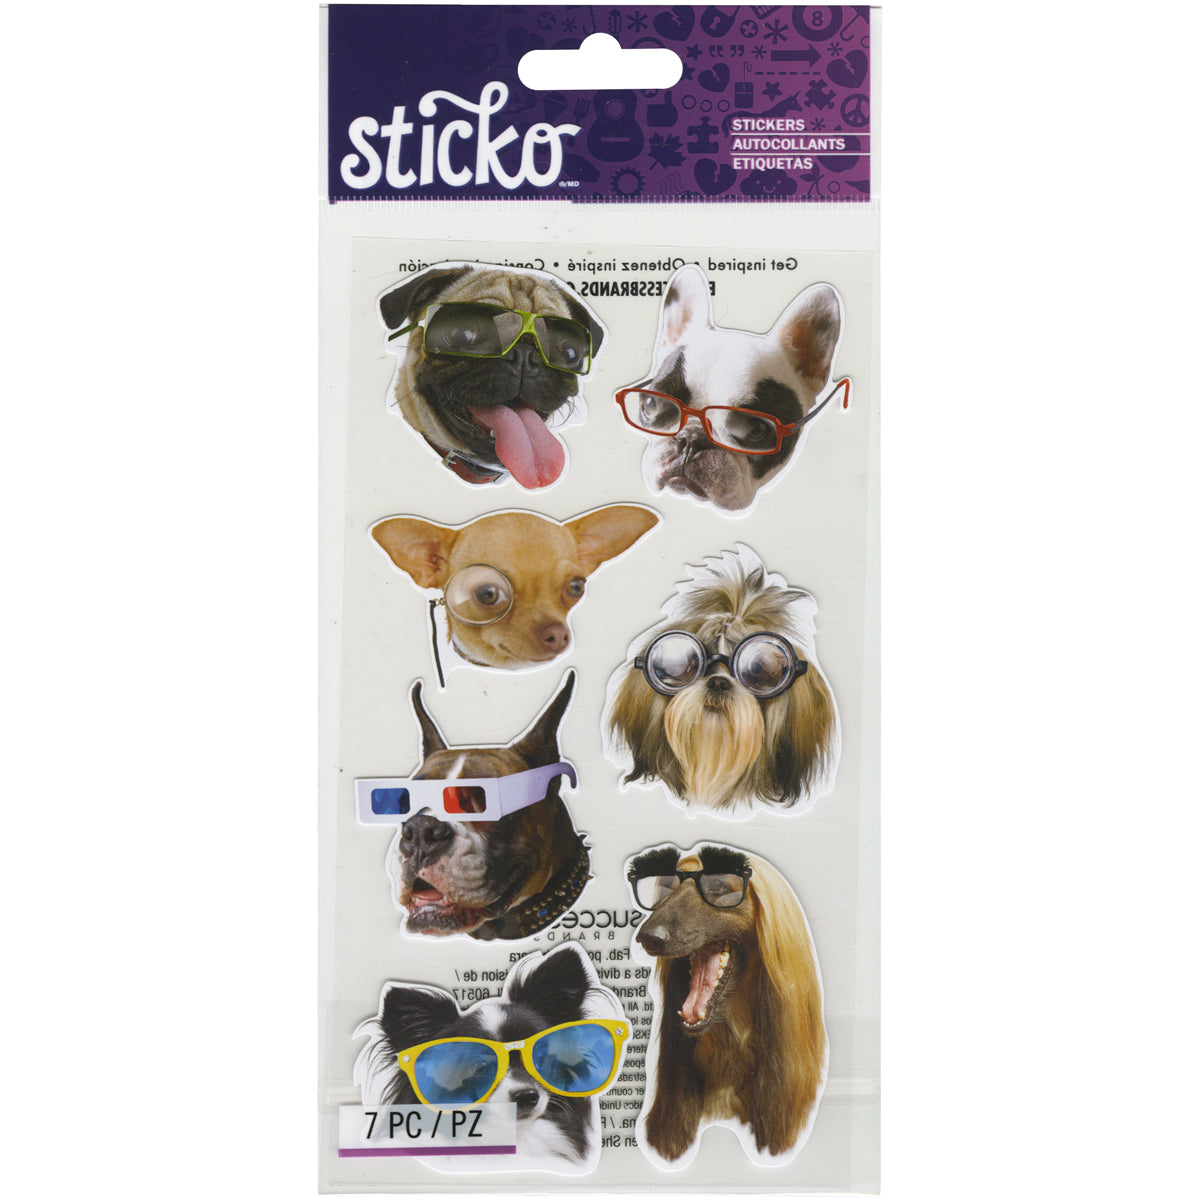 Sticko Stickers-Funny Dogs